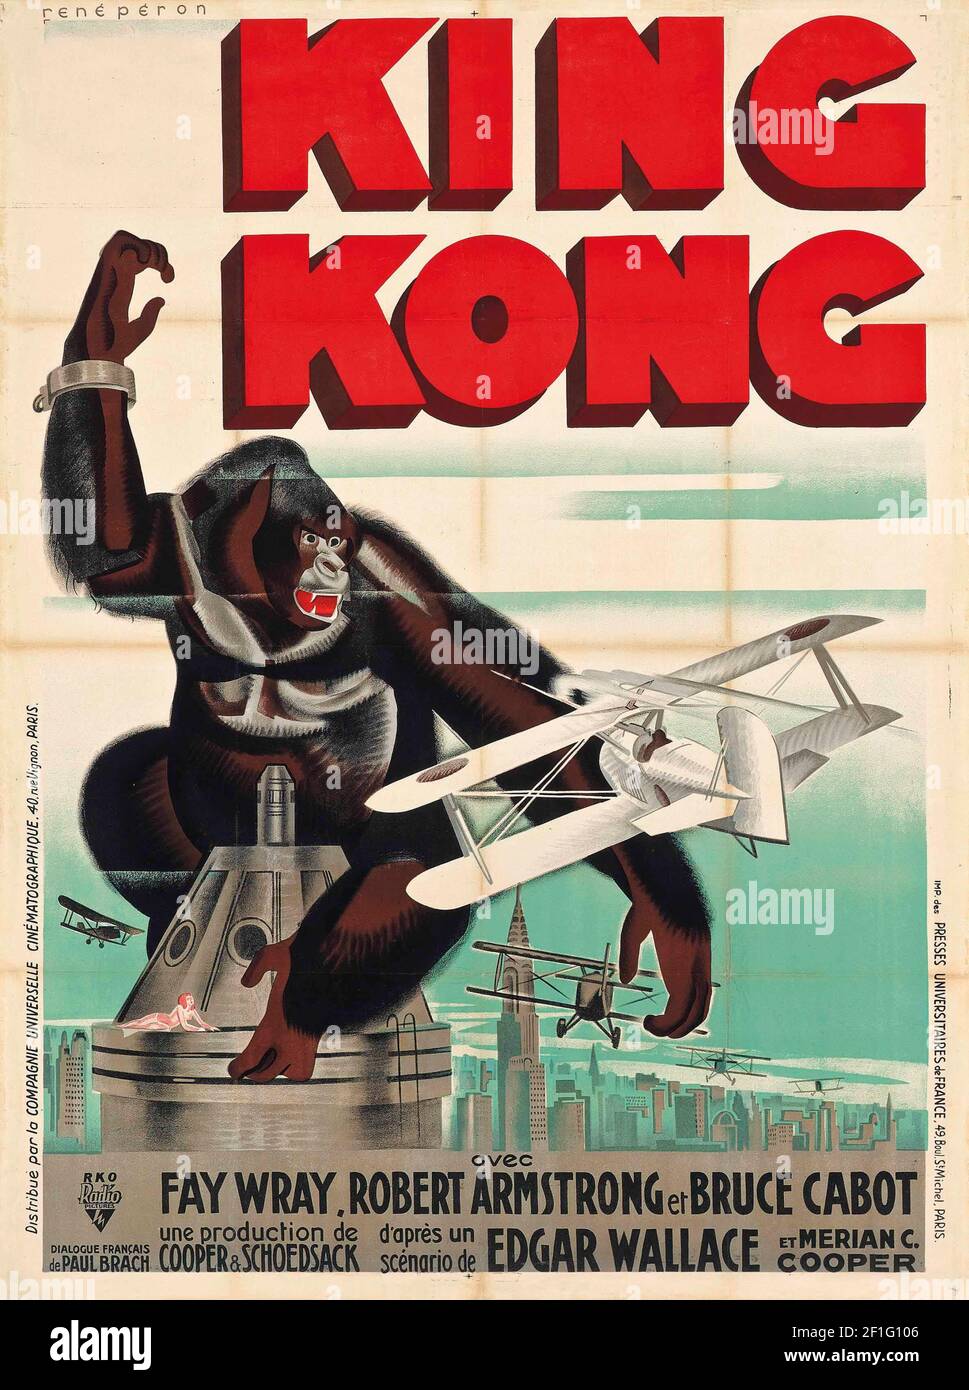 Classic movie poster, old and vintage. King Kong. 1933. French version. Feat. Fay Wray, Robert Armstrong and Bruce Cabot. Stock Photo